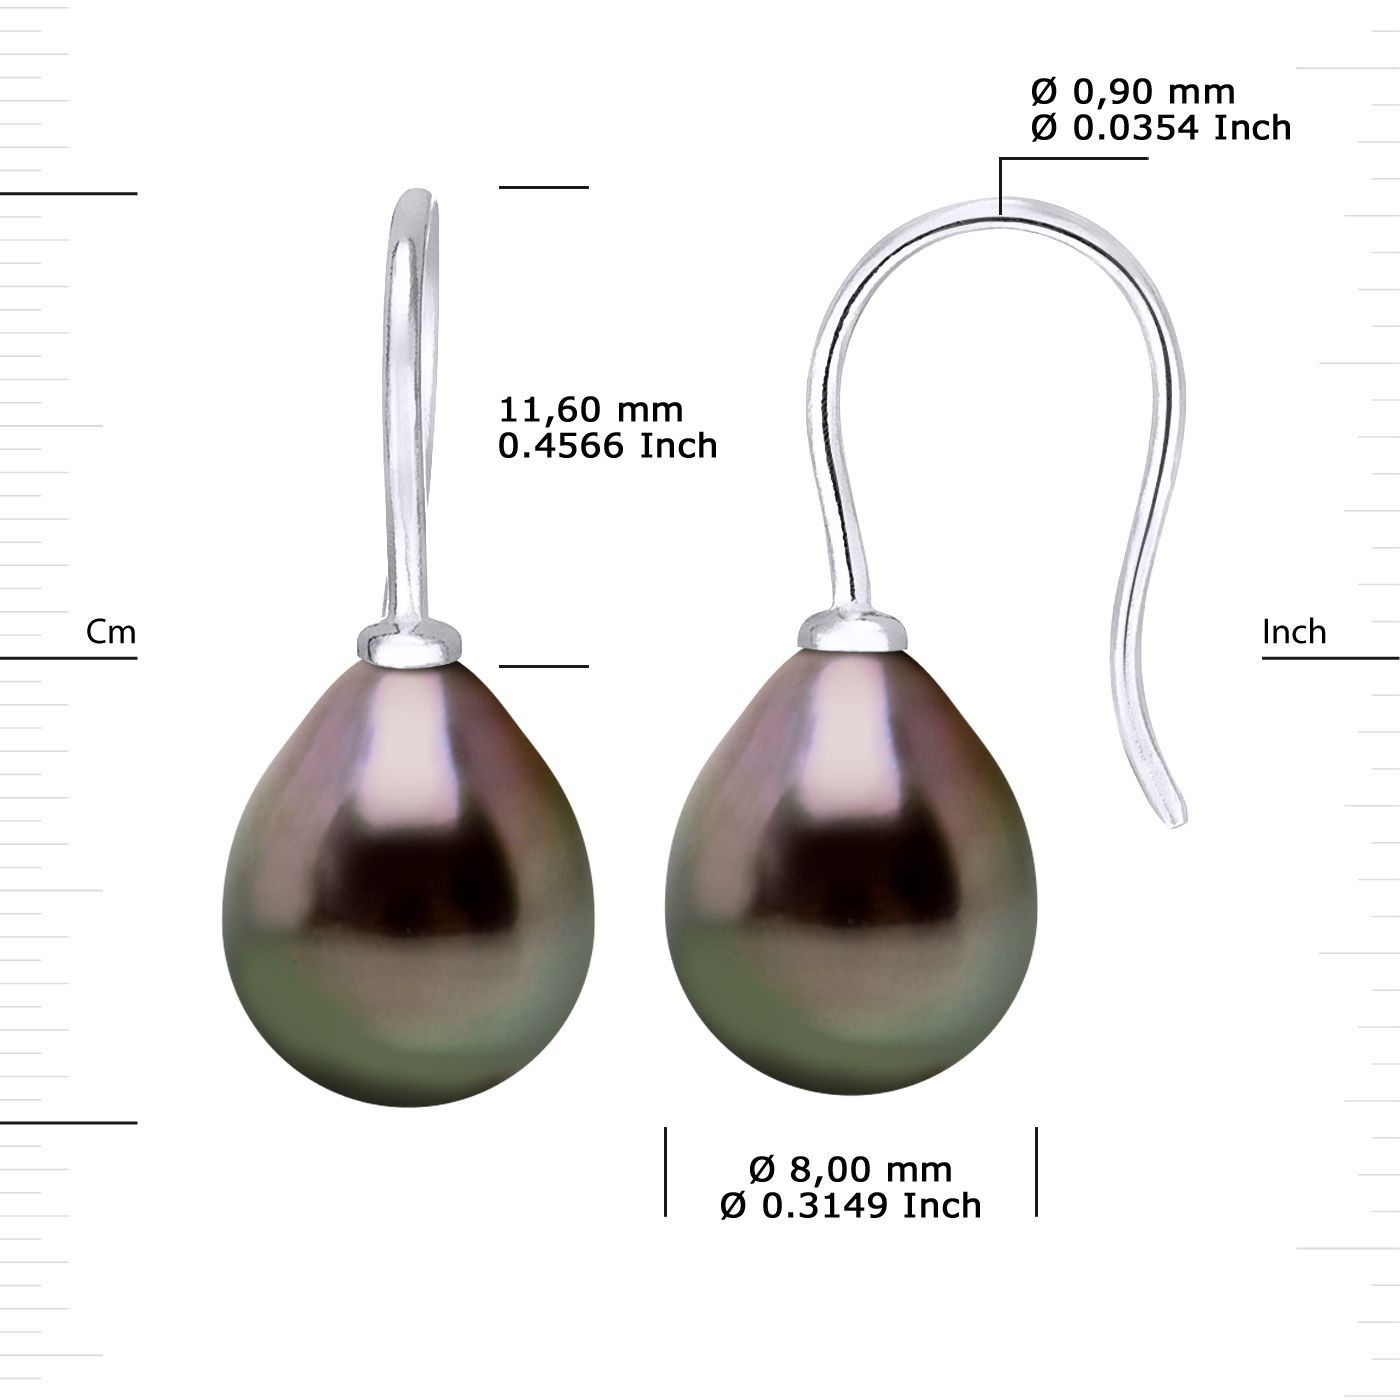 Earrings of 925 Sterling Silver and true Cultured Tahitian Pearl Pear Shape 8-9 mm , 0,31 in - Hook system - Our jewellery is made in France and will be delivered in a gift box accompanied by a Certificate of Authenticity and International Warranty